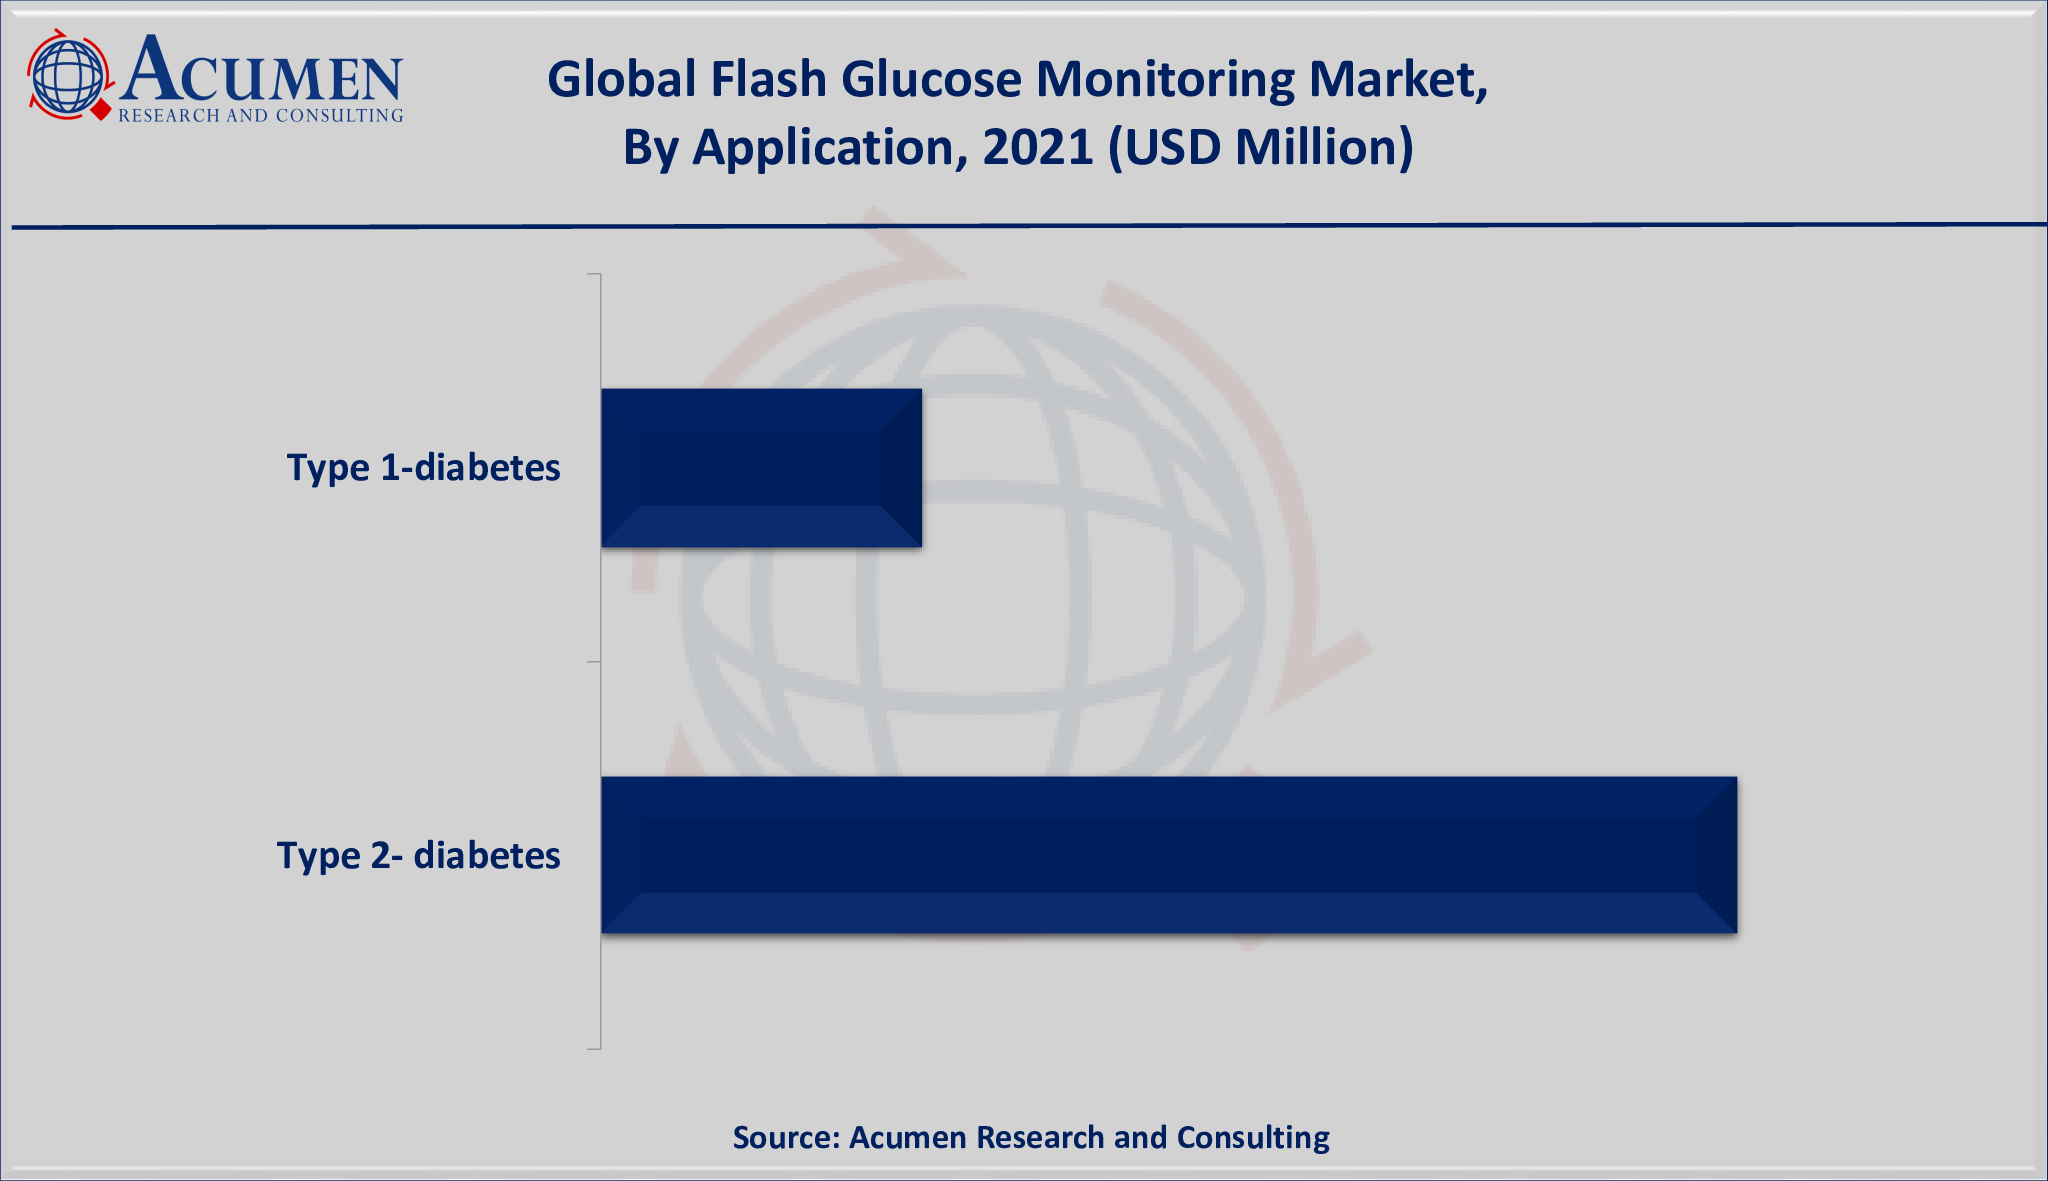 Flash Glucose Monitoring Market Size is valued at USD 12,905 million in 2021 and is estimated to achieve a market size of USD 24,765 million by 2030